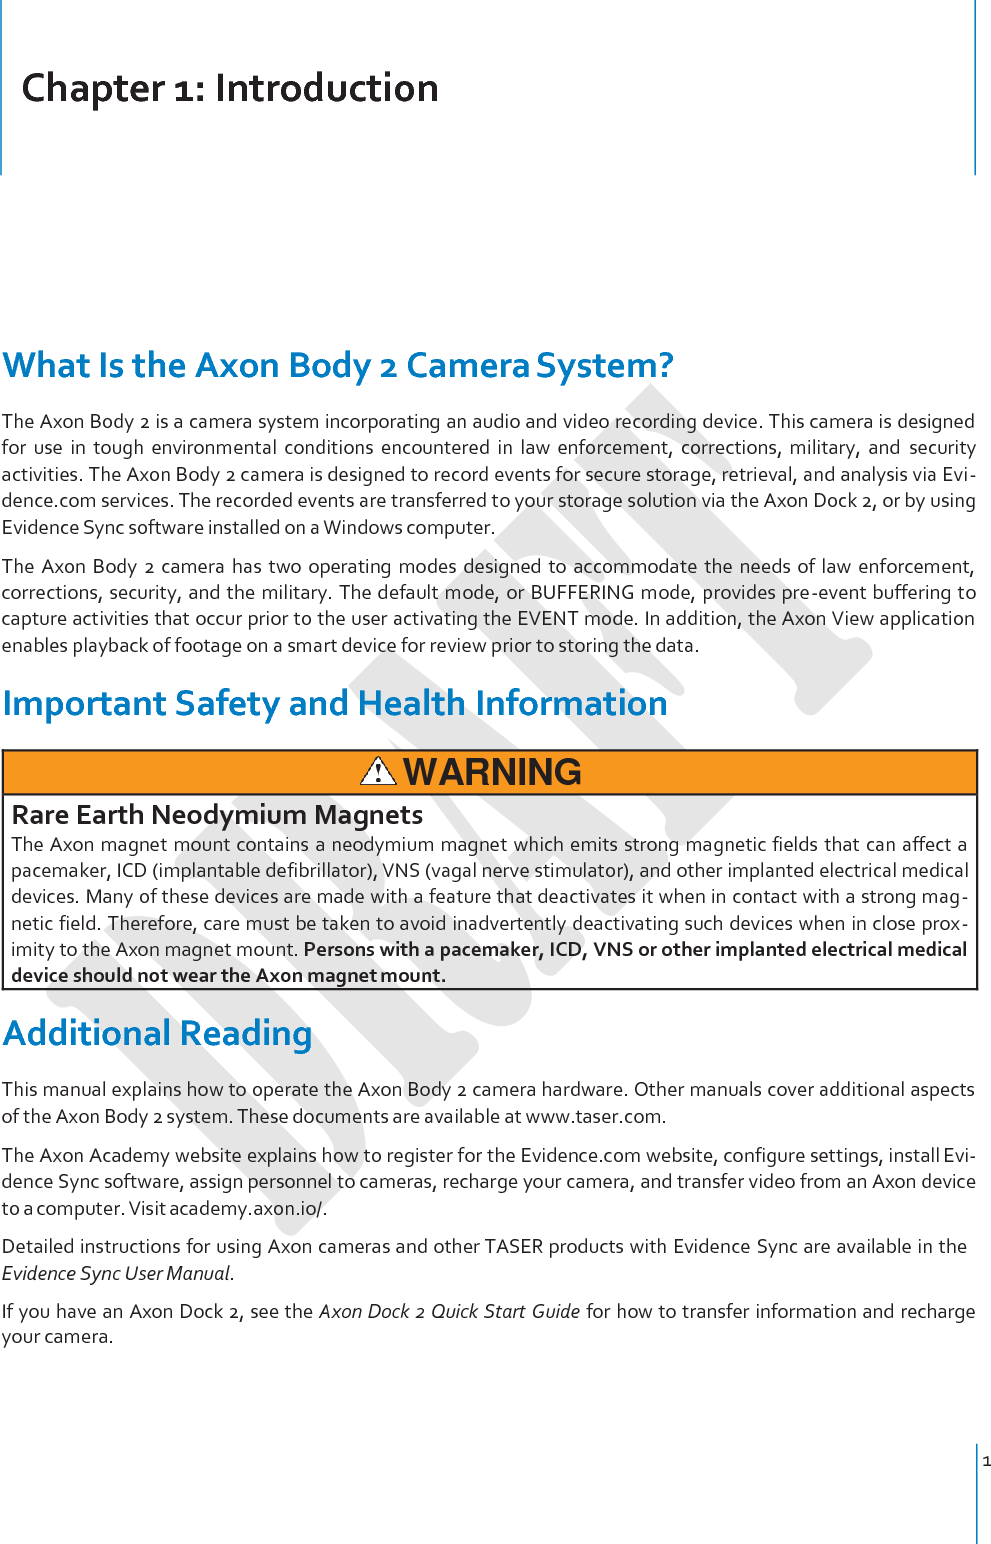 Chapter 1: Introduction 1         What Is the Axon Body 2 Camera System? The Axon Body 2 is a camera system incorporating an audio and video recording device. This camera is designed for  use  in  tough  environmental  conditions  encountered  in  law  enforcement,  corrections,  military,  and  security activities. The Axon Body 2 camera is designed to record events for secure storage, retrieval, and analysis via Evi- dence.com services. The recorded events are transferred to your storage solution via the Axon Dock 2, or by using Evidence Sync software installed on a Windows computer. The Axon  Body  2  camera  has  two  operating  modes  designed to  accommodate  the  needs  of  law  enforcement, corrections, security, and the military. The default mode, or BUFFERING mode, provides pre-event buffering to capture activities that occur prior to the user activating the EVENT mode. In addition, the Axon View application enables playback of footage on a smart device for review prior to storing the data.  Important Safety and Health Information   WARNING Rare Earth Neodymium Magnets The Axon magnet mount contains a neodymium magnet which emits strong magnetic fields that can affect a pacemaker, ICD (implantable defibrillator), VNS (vagal nerve stimulator), and other implanted electrical medical devices. Many of these devices are made with a feature that deactivates it when in contact with a strong mag- netic field. Therefore, care must be taken to avoid inadvertently deactivating such devices when in close prox- imity to the Axon magnet mount. Persons with a pacemaker, ICD, VNS or other implanted electrical medical device should not wear the Axon magnet mount. Additional Reading This manual explains how to operate the Axon Body 2 camera hardware. Other manuals cover additional aspects of the Axon Body 2 system. These documents are available at www.taser.com. The Axon Academy website explains how to register for the Evidence.com website, configure settings, install Evi- dence Sync software, assign personnel to cameras, recharge your camera, and transfer video from an Axon device to a computer. Visit academy.axon.io/. Detailed instructions for using Axon cameras and other TASER products with Evidence Sync are available in the Evidence Sync User Manual. If you have an Axon Dock 2, see the Axon Dock 2 Quick Start Guide for how to transfer information and recharge your camera. 